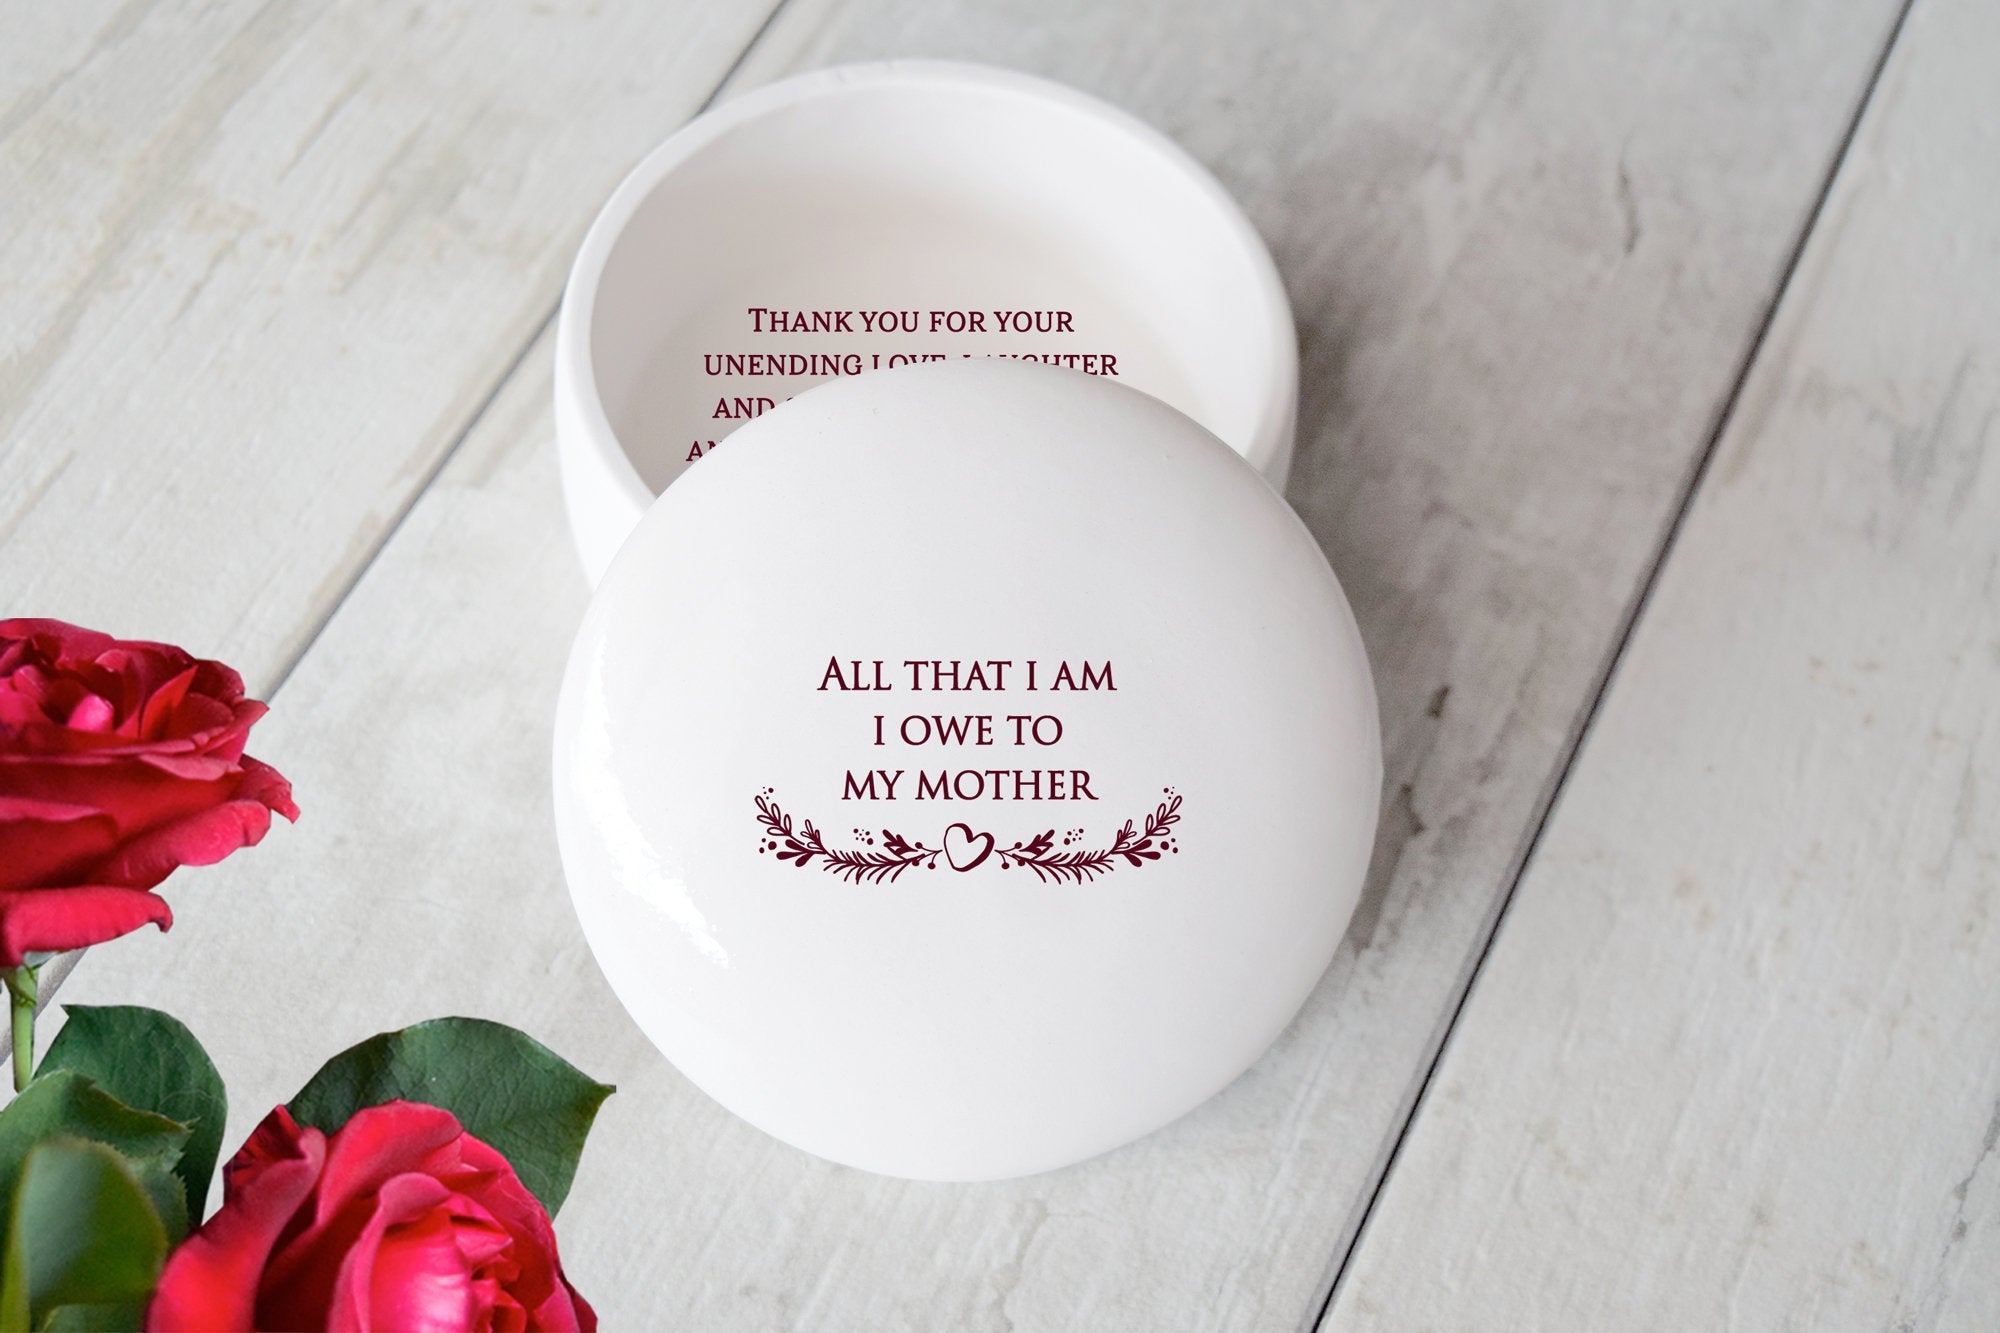 Personalized Gifts For Mom  Custom Presents For Mothers On Every